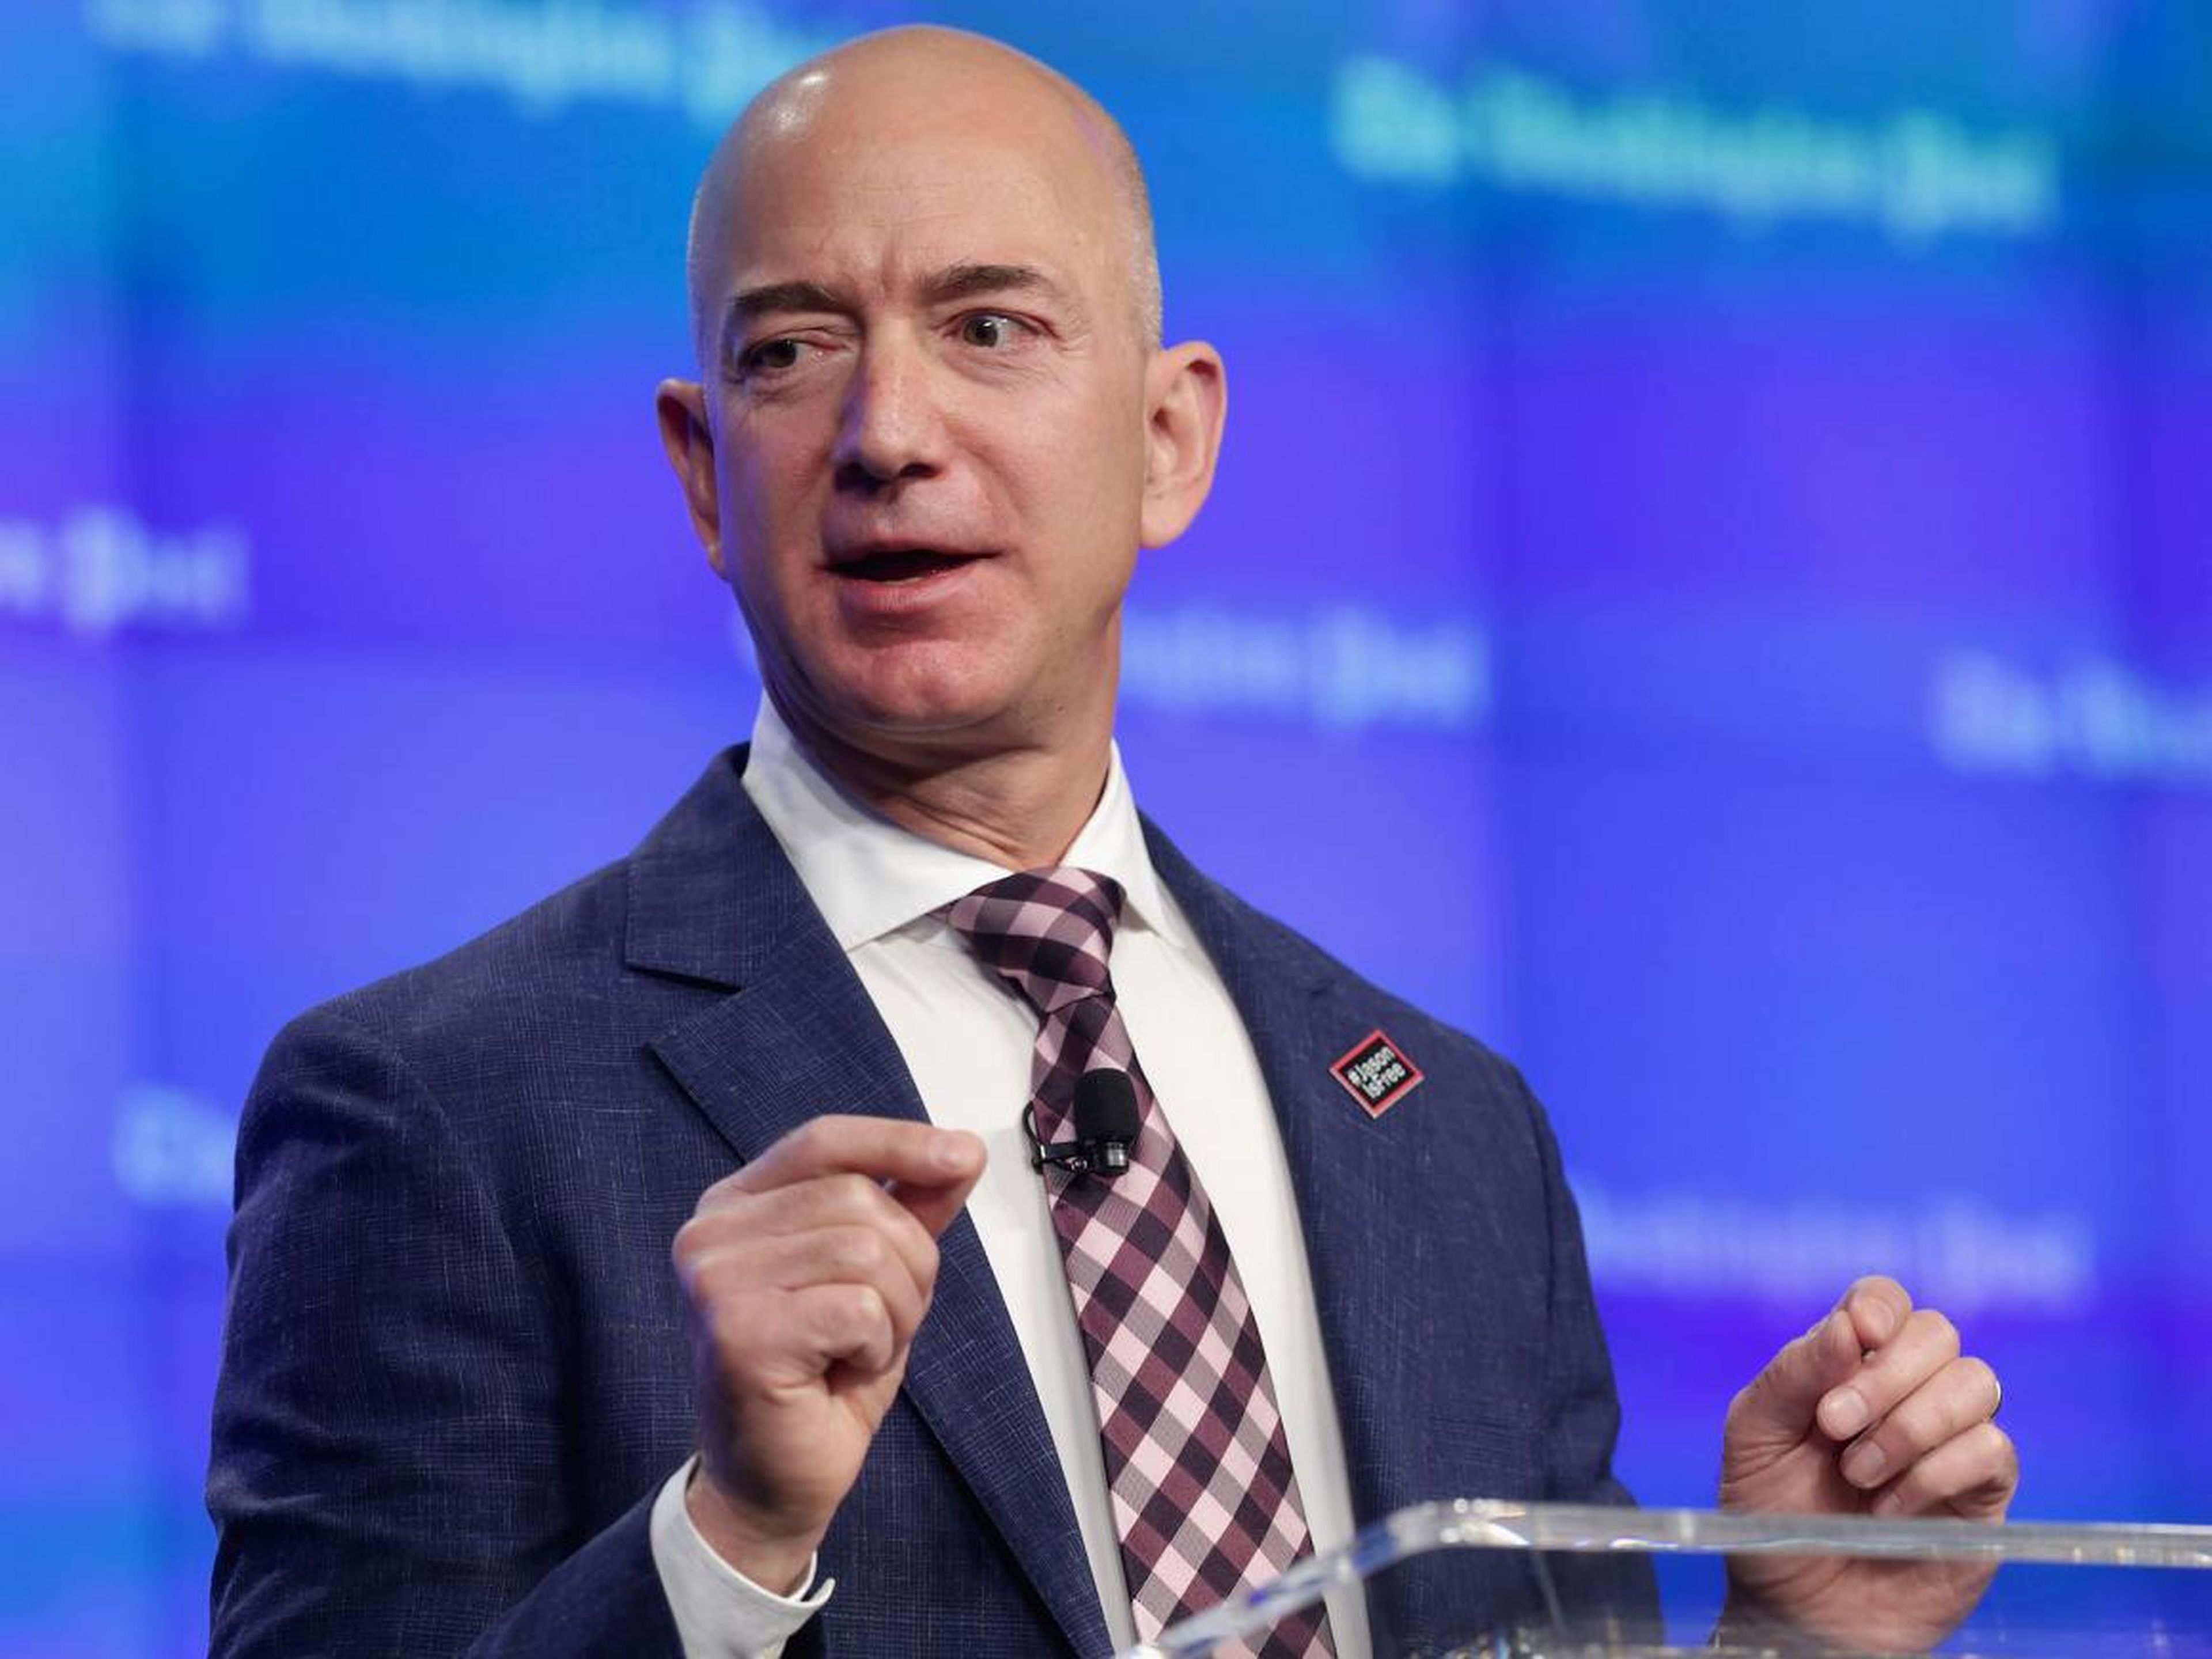 "I think frugality drives innovation, just like other constraints do. One of the only ways to get out of a tight box is to invent your way out." — Jeff Bezos, CEO of Amazon